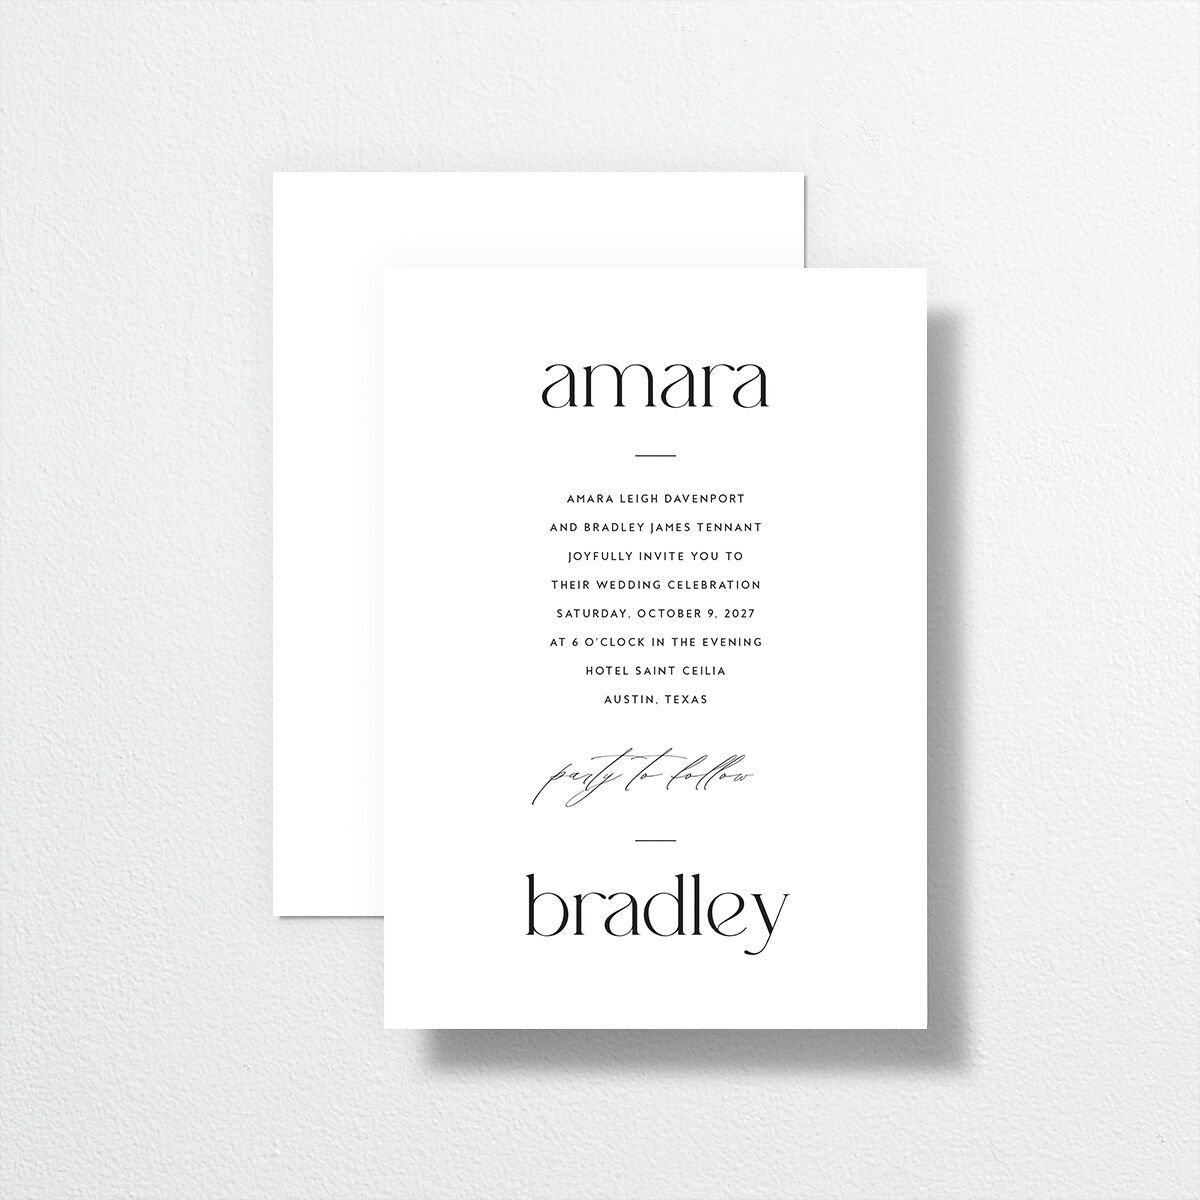 Modern Balance Wedding Invitations front-and-back in Black